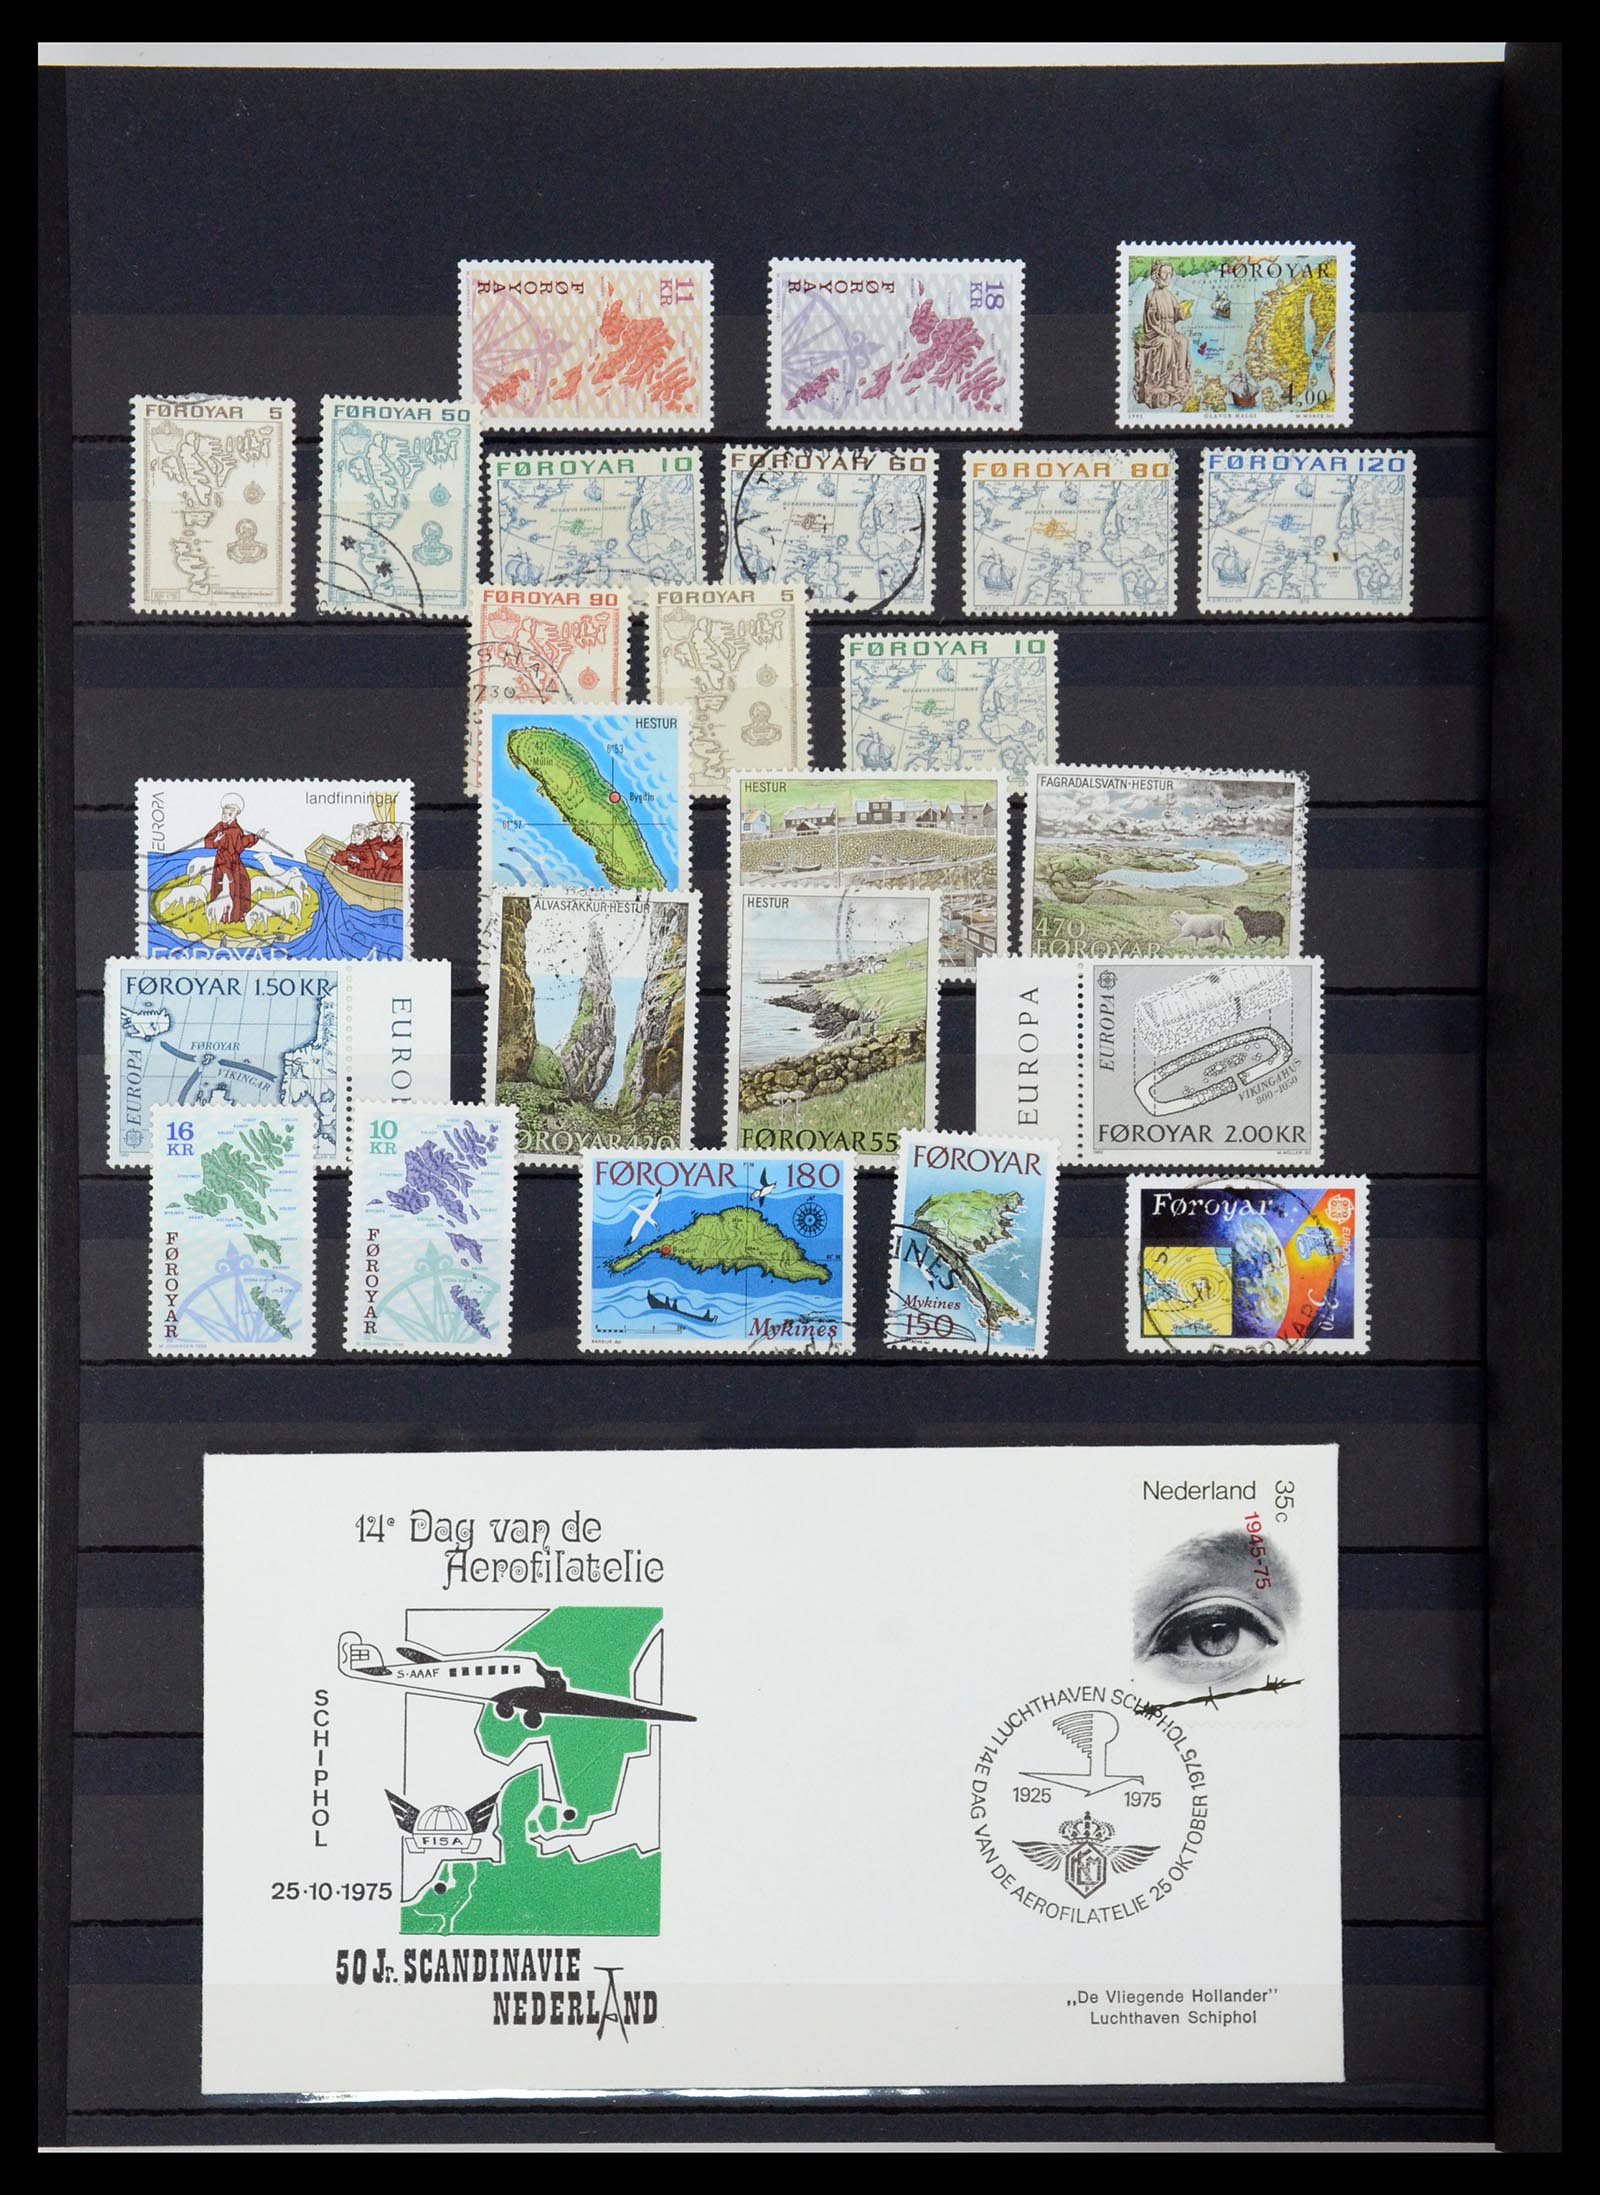 36238 096 - Stamp collection 36238 Motif maps 1900-2000.